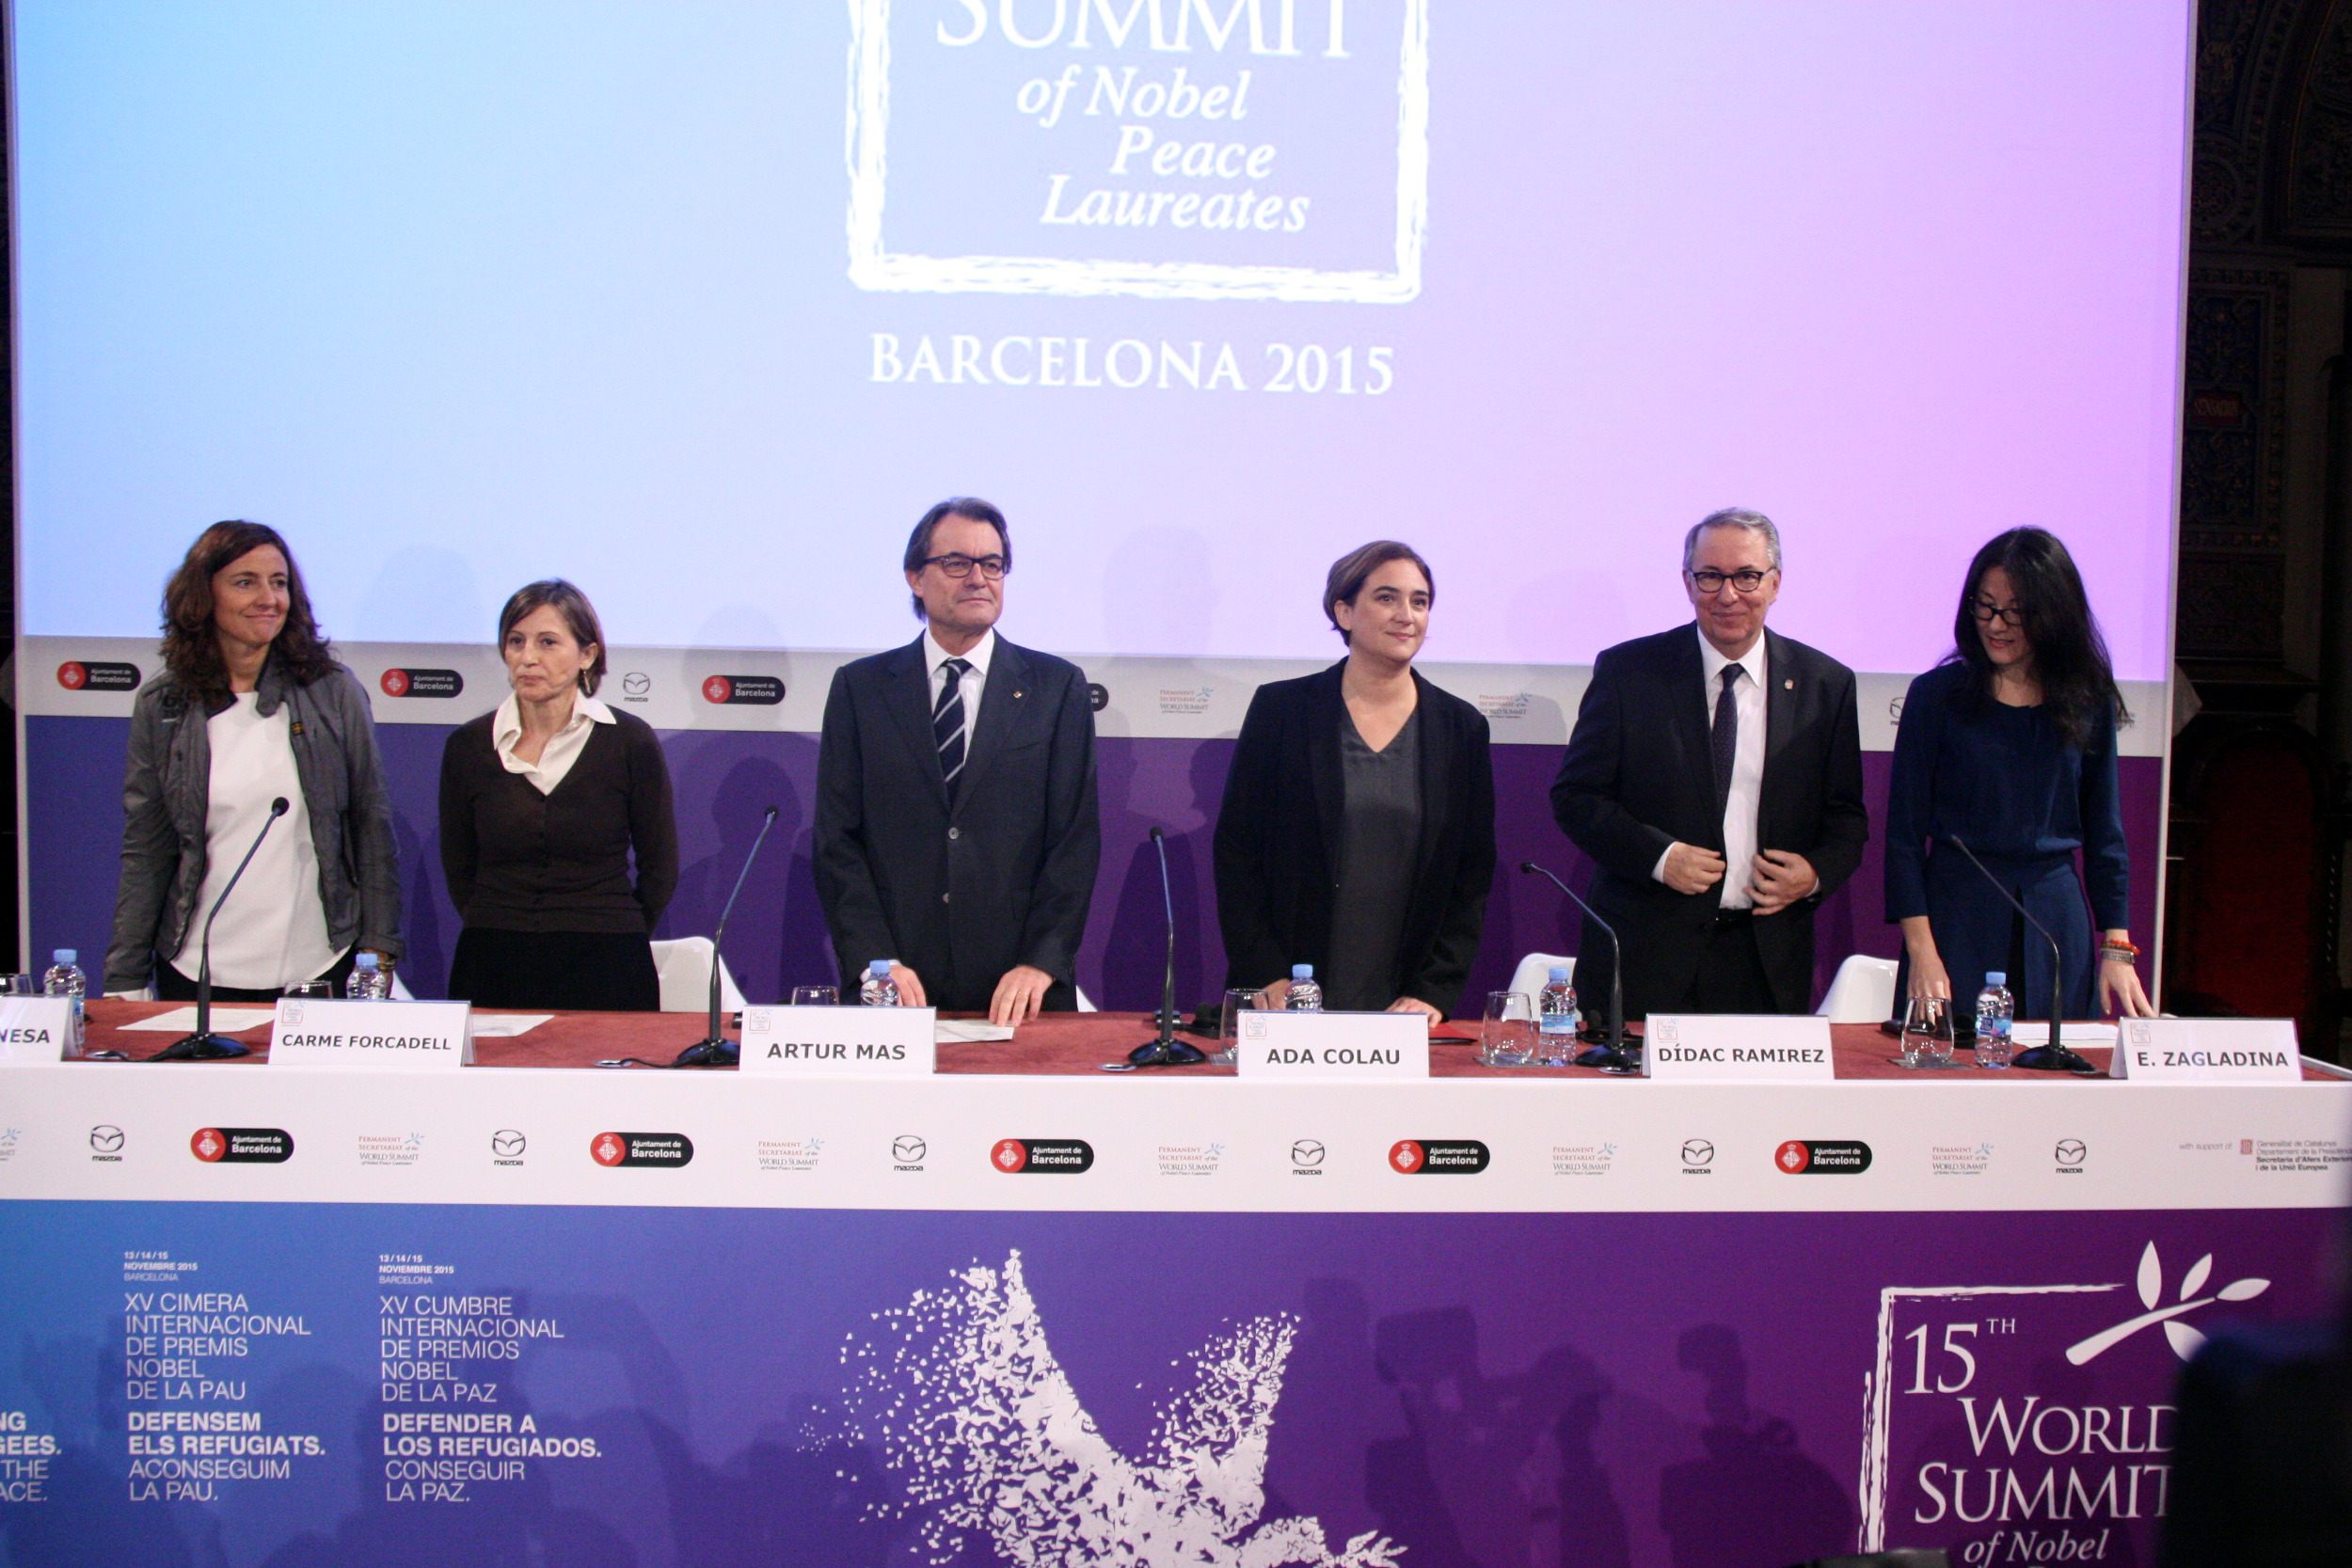 Image of the 15th World Summit of Nobel Peace Laureates' opening session in Barcelona, with current Catalan President, Artur Mas and Barcelona's Mayor, Ada Colau on the centre (by ACN)